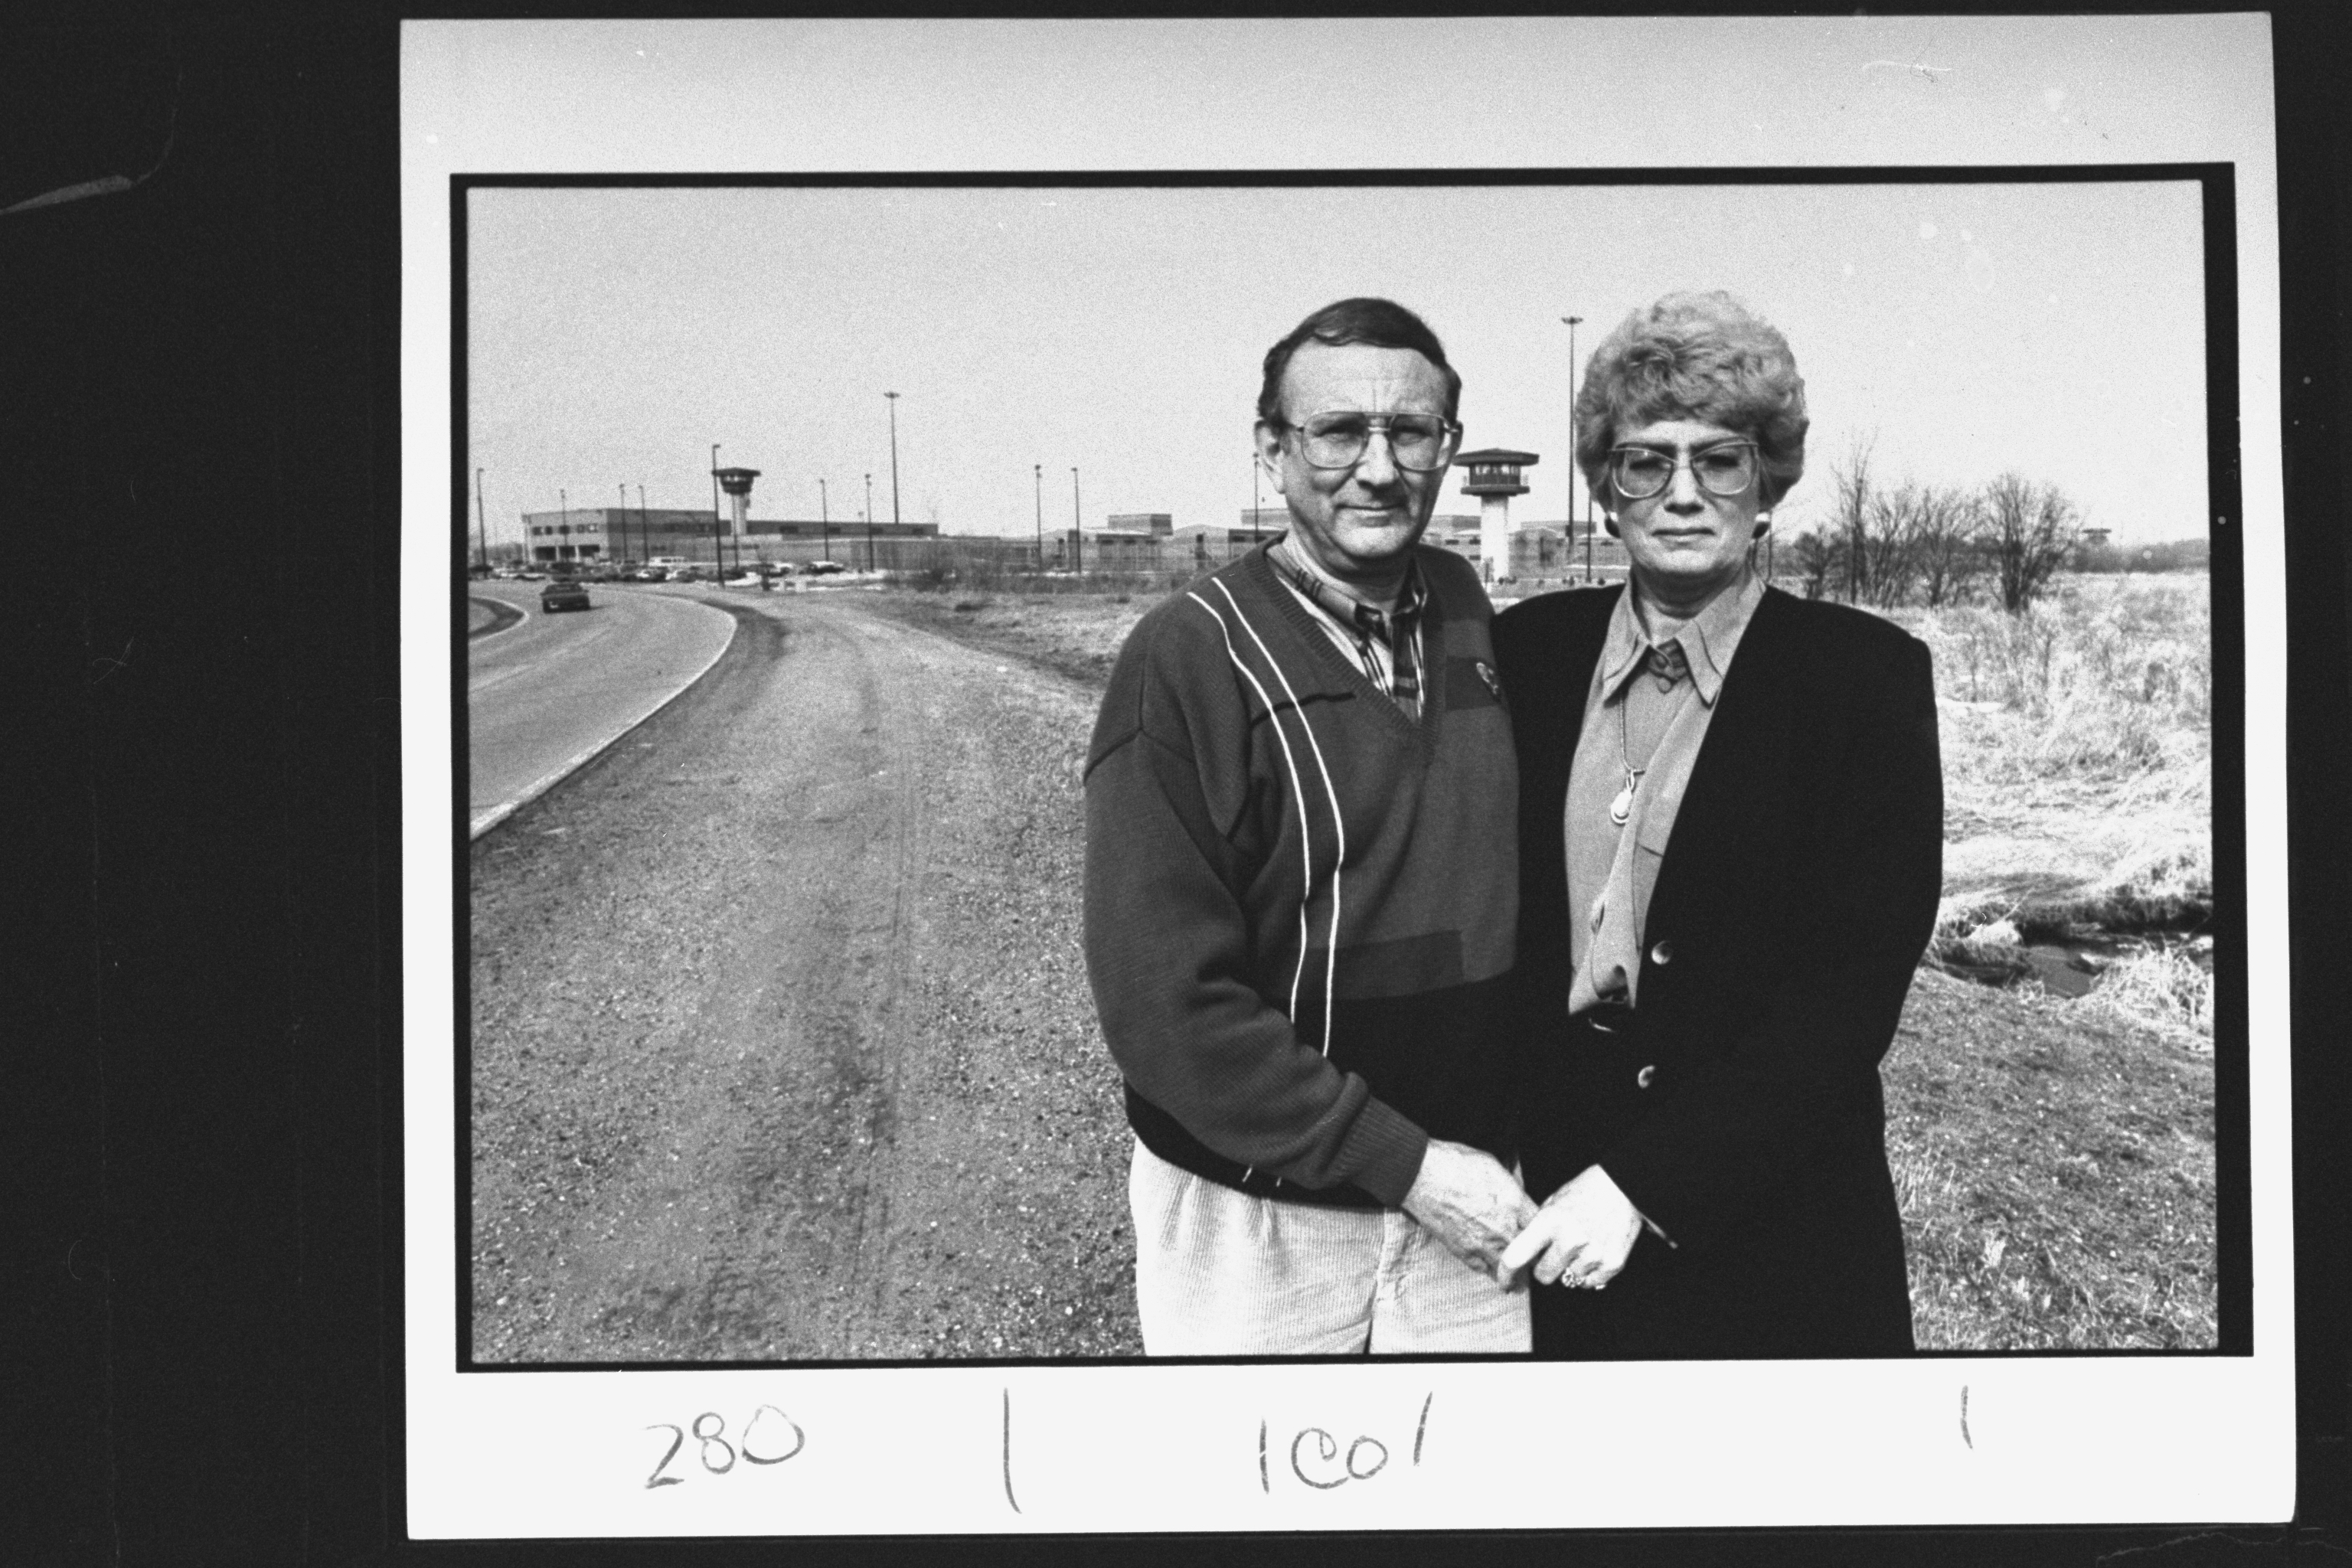 Lionel Dahmer and Shari Jordan outside Columbia Correctional Institute, where Jeffrey Dahmer was imprisoned, on March 12, 1994. | Source: Getty Images